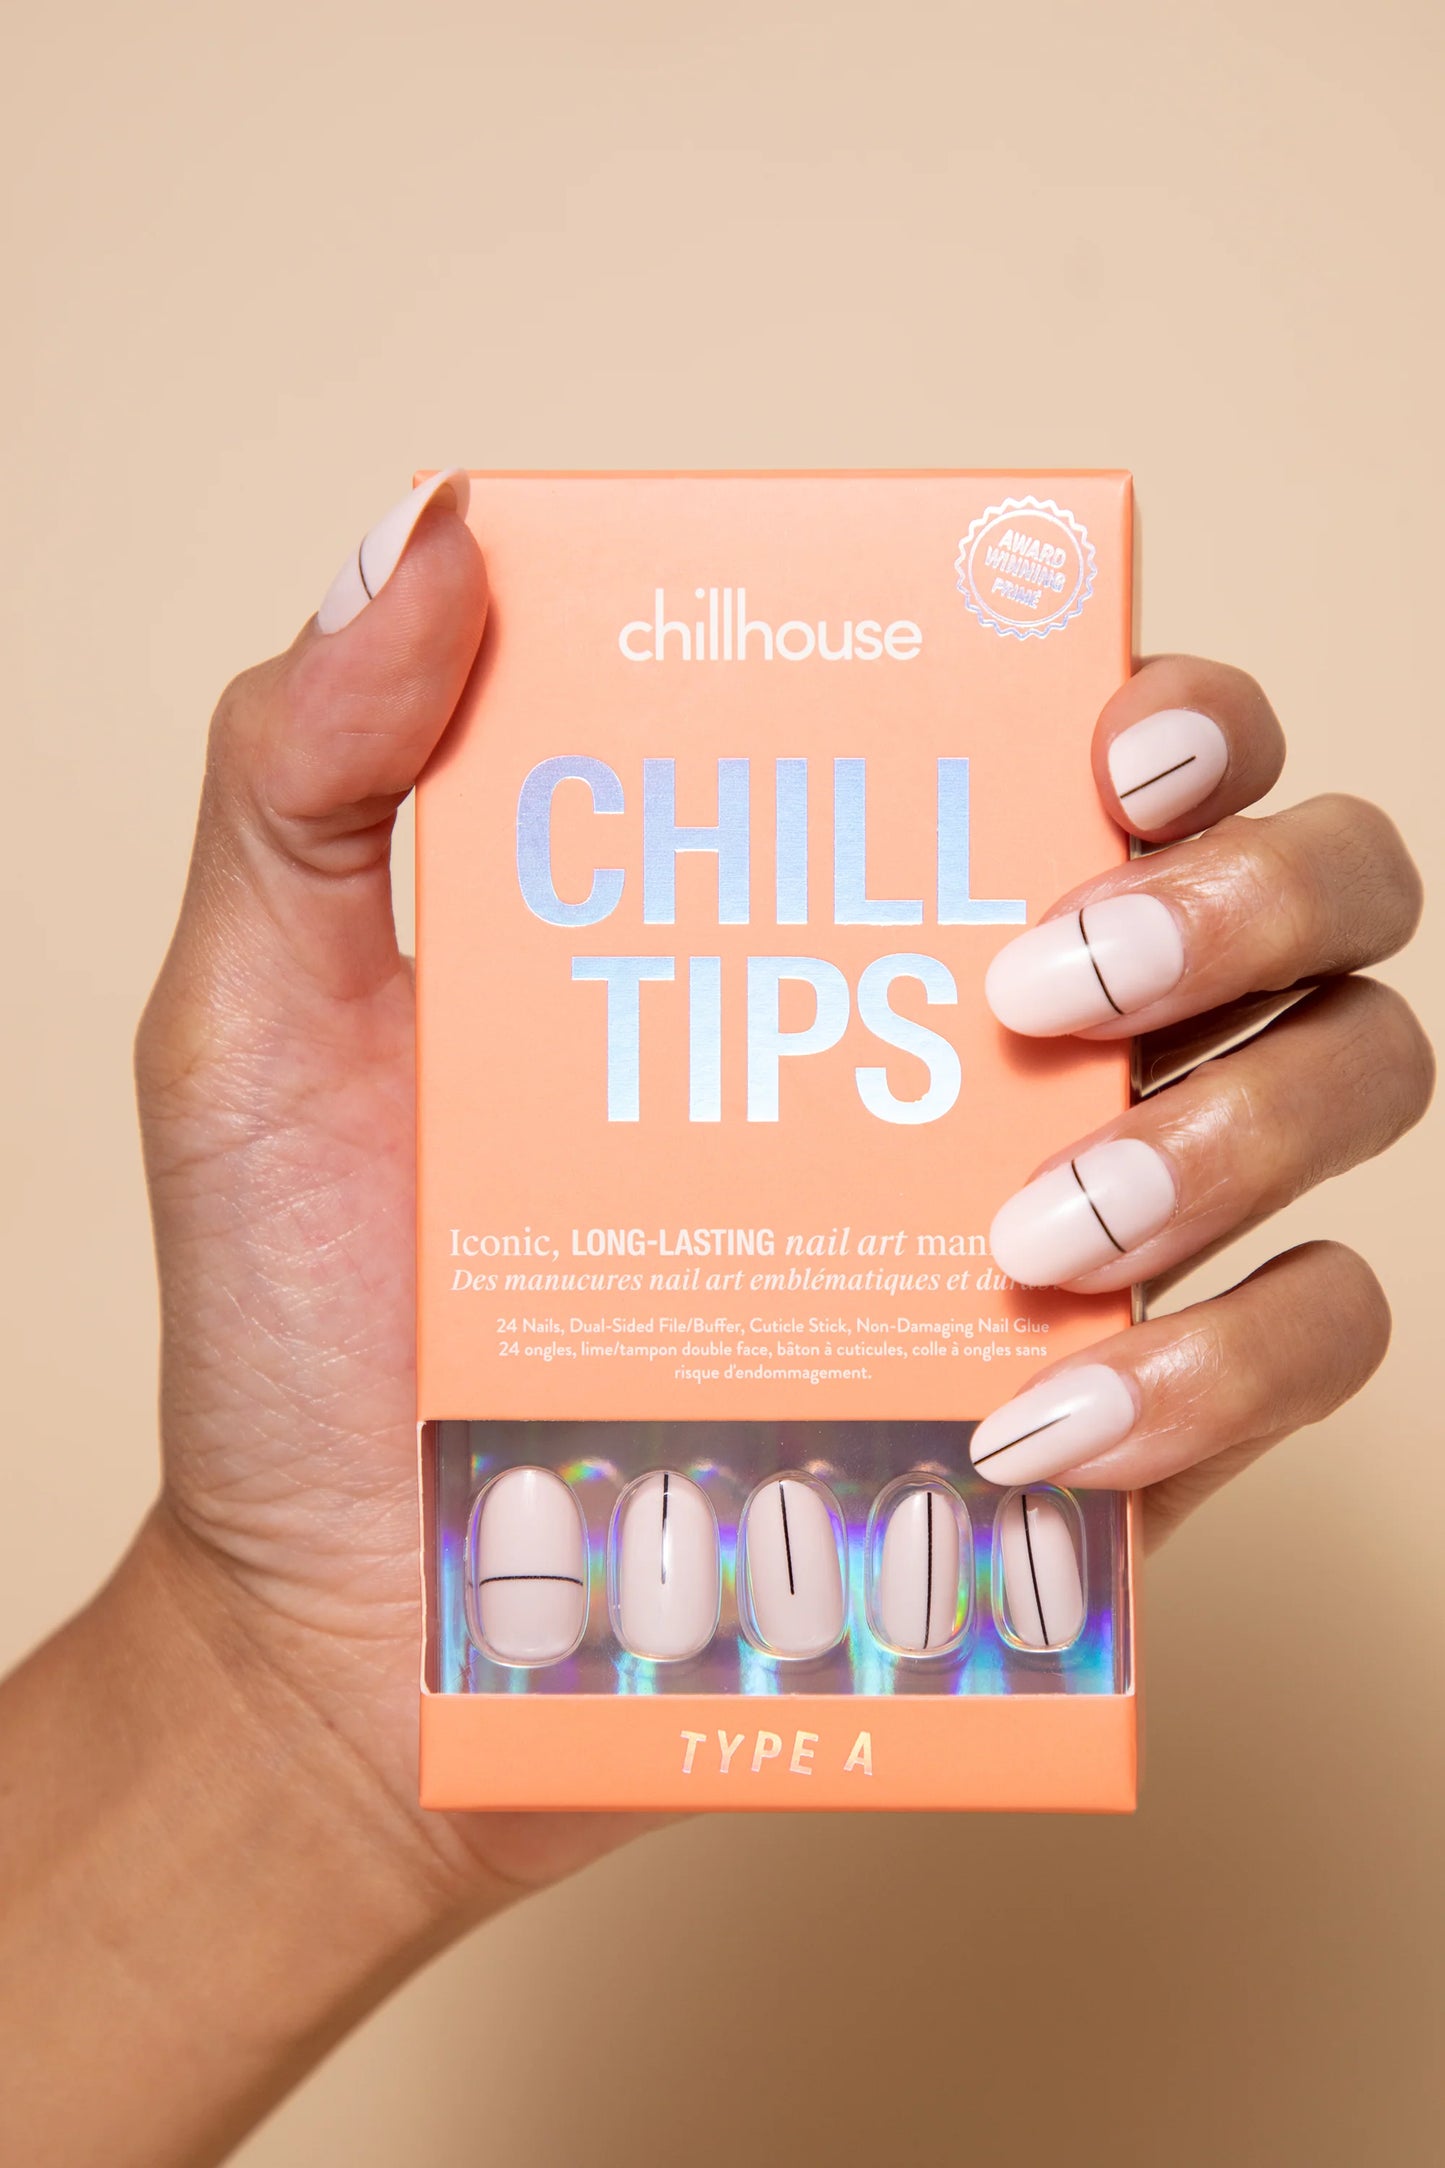 Chillhouse Chill Tips Long Lasting Nail Art Manicures | Type A